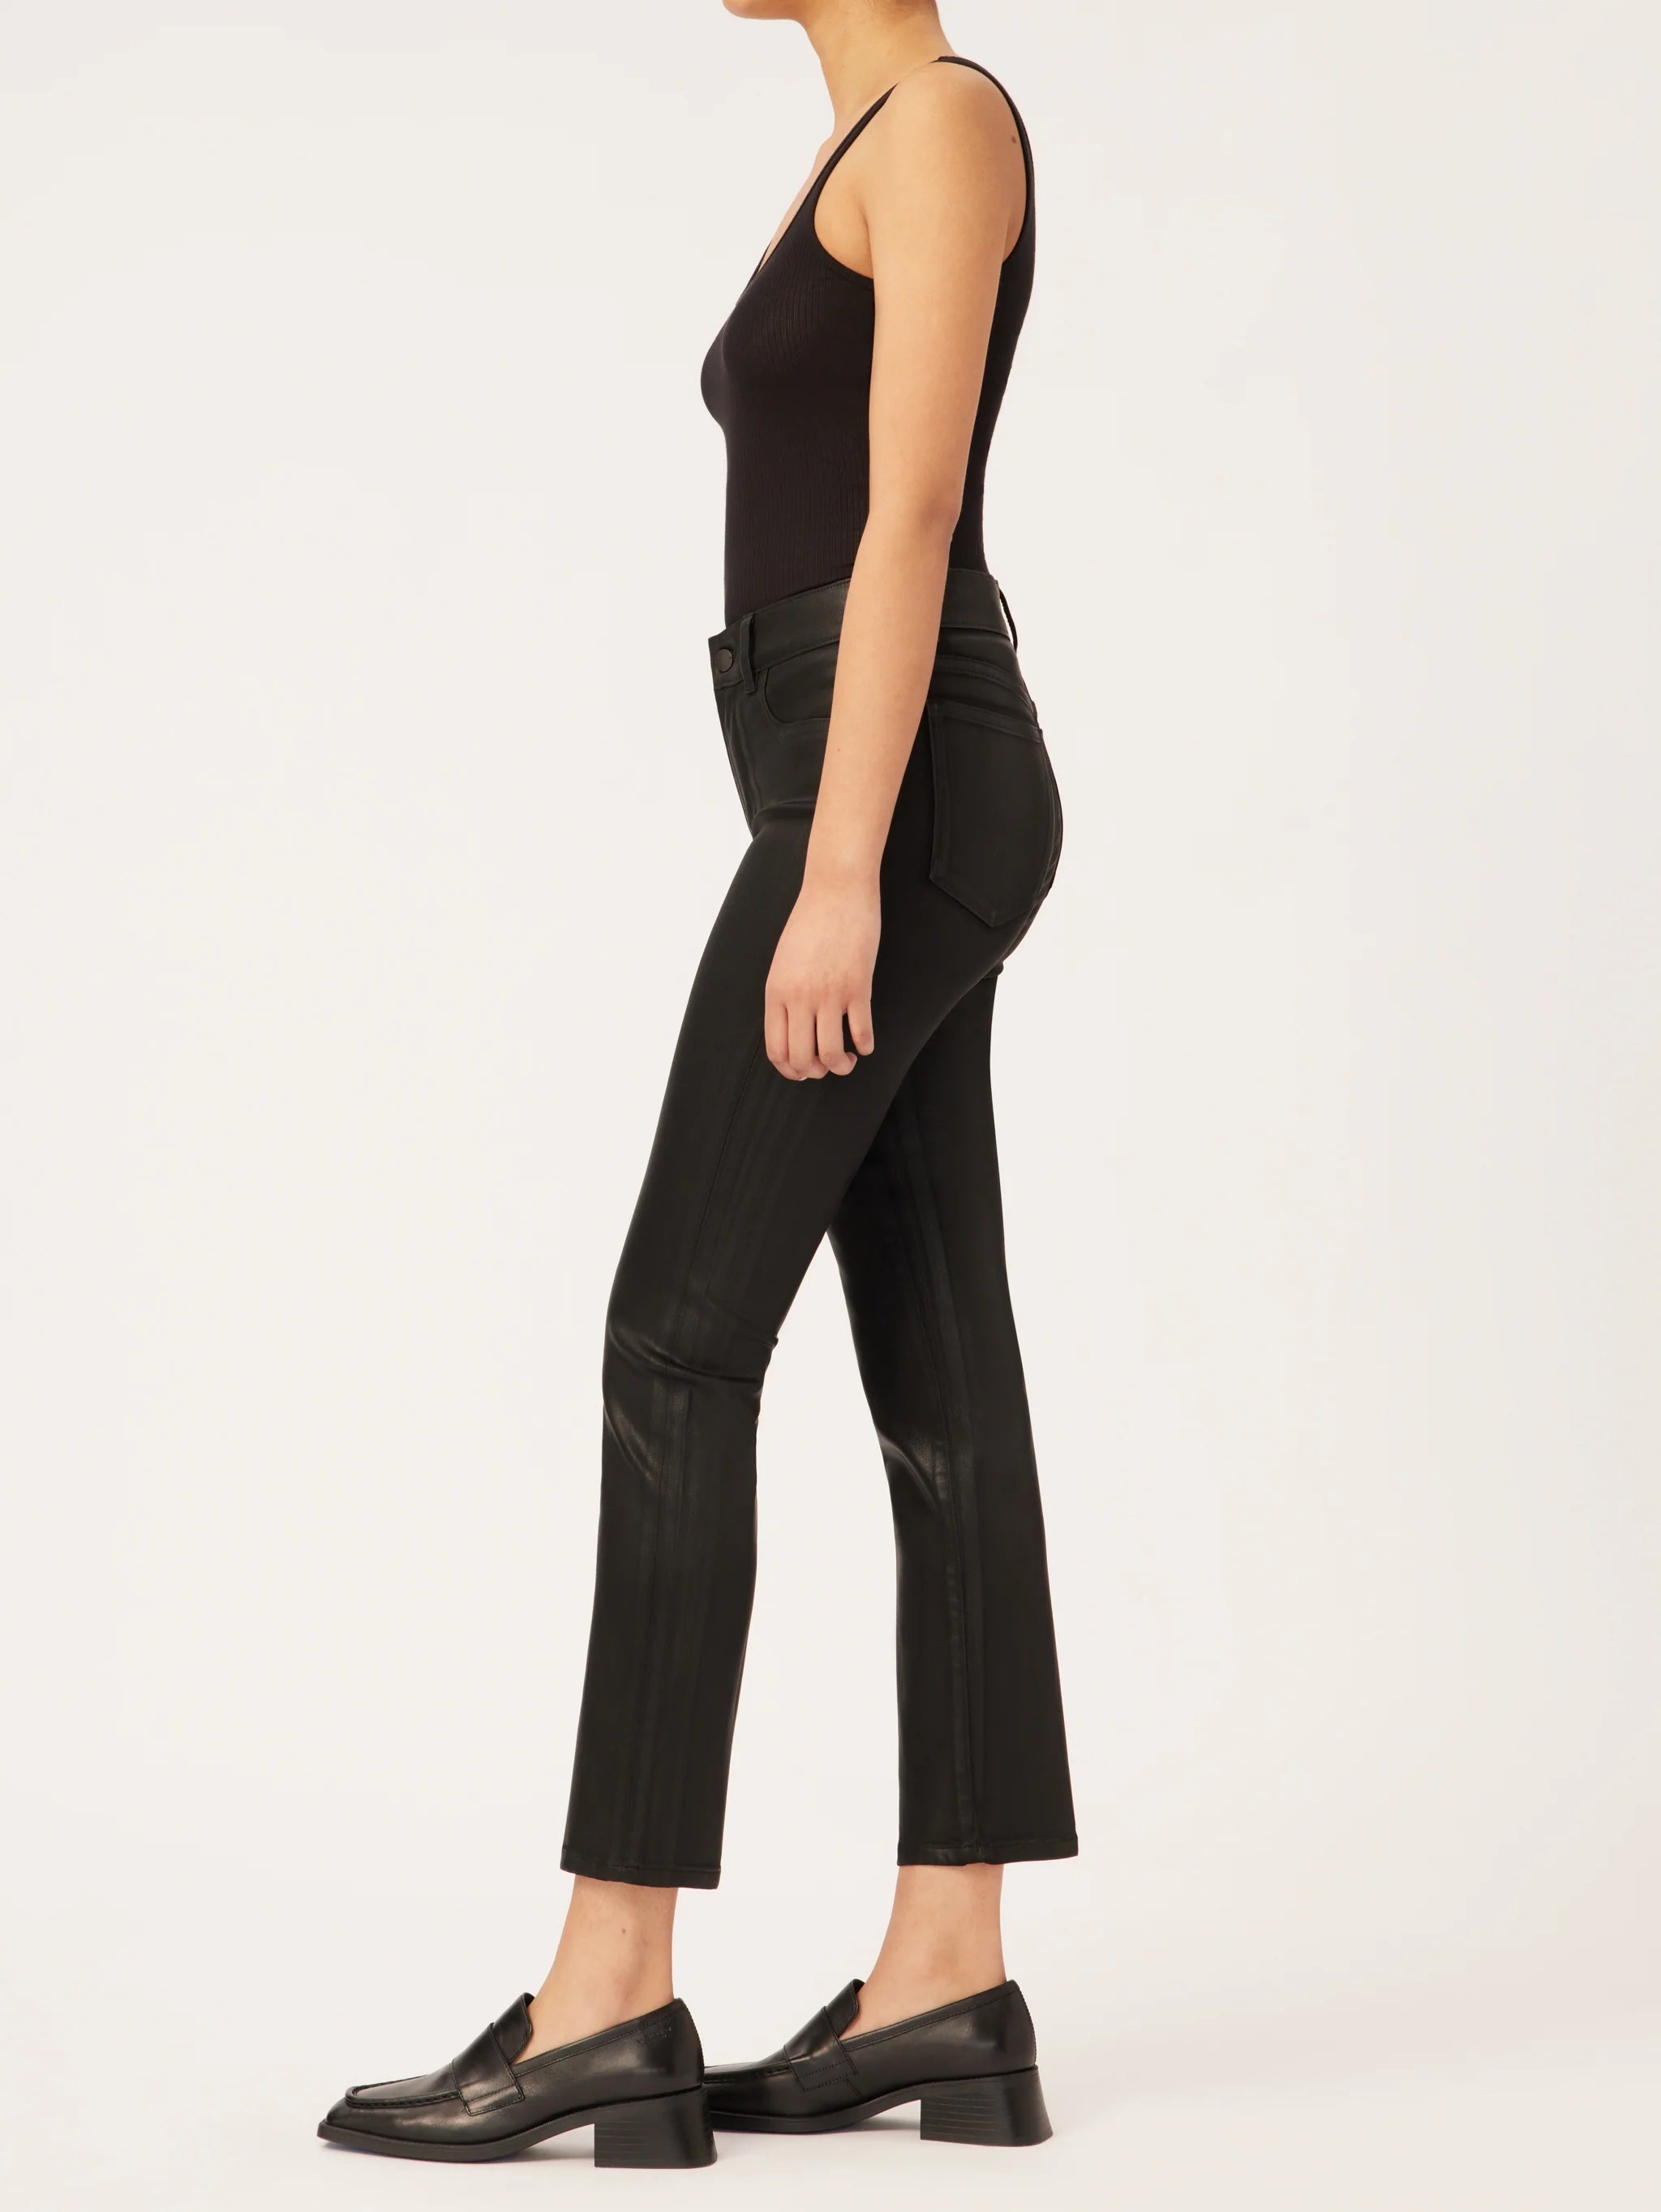 DL1961 Mara Straight - Black Coated Clothing - Bottoms - Denim - Premium by DL1961 | Grace the Boutique